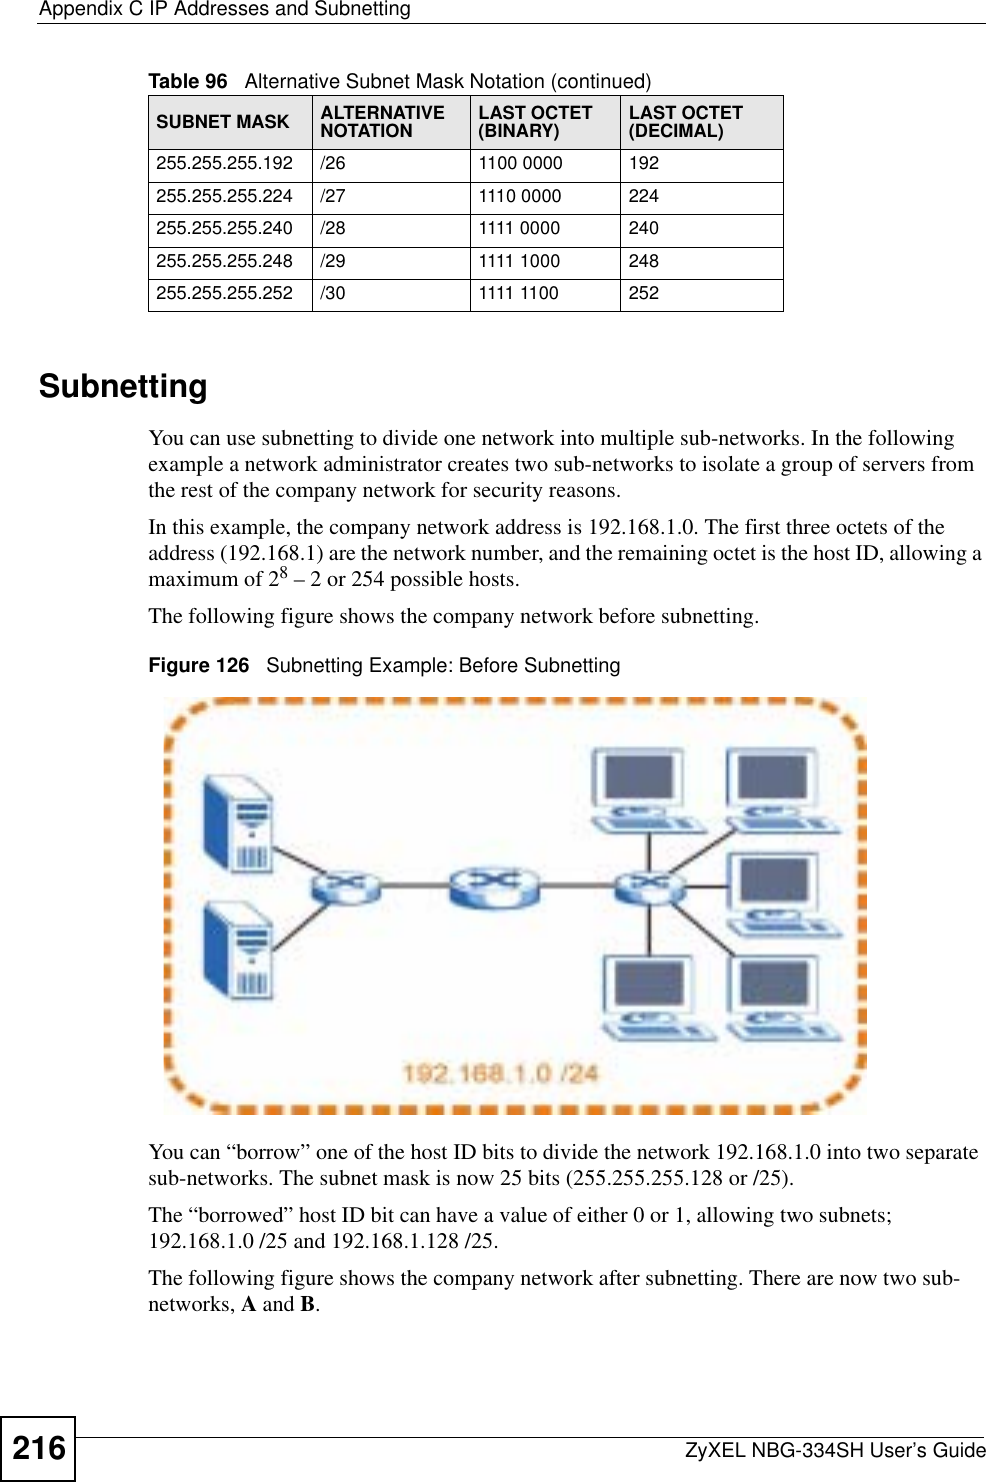 Appendix C IP Addresses and SubnettingZyXEL NBG-334SH User’s Guide216SubnettingYou can use subnetting to divide one network into multiple sub-networks. In the following example a network administrator creates two sub-networks to isolate a group of servers from the rest of the company network for security reasons.In this example, the company network address is 192.168.1.0. The first three octets of the address (192.168.1) are the network number, and the remaining octet is the host ID, allowing a maximum of 28 – 2 or 254 possible hosts.The following figure shows the company network before subnetting.  Figure 126   Subnetting Example: Before SubnettingYou can “borrow” one of the host ID bits to divide the network 192.168.1.0 into two separate sub-networks. The subnet mask is now 25 bits (255.255.255.128 or /25).The “borrowed” host ID bit can have a value of either 0 or 1, allowing two subnets; 192.168.1.0 /25 and 192.168.1.128 /25. The following figure shows the company network after subnetting. There are now two sub-networks, A and B.255.255.255.192 /26 1100 0000 192255.255.255.224 /27 1110 0000 224255.255.255.240 /28 1111 0000 240255.255.255.248 /29 1111 1000 248255.255.255.252 /30 1111 1100 252Table 96   Alternative Subnet Mask Notation (continued)SUBNET MASK ALTERNATIVE NOTATION LAST OCTET (BINARY) LAST OCTET (DECIMAL)